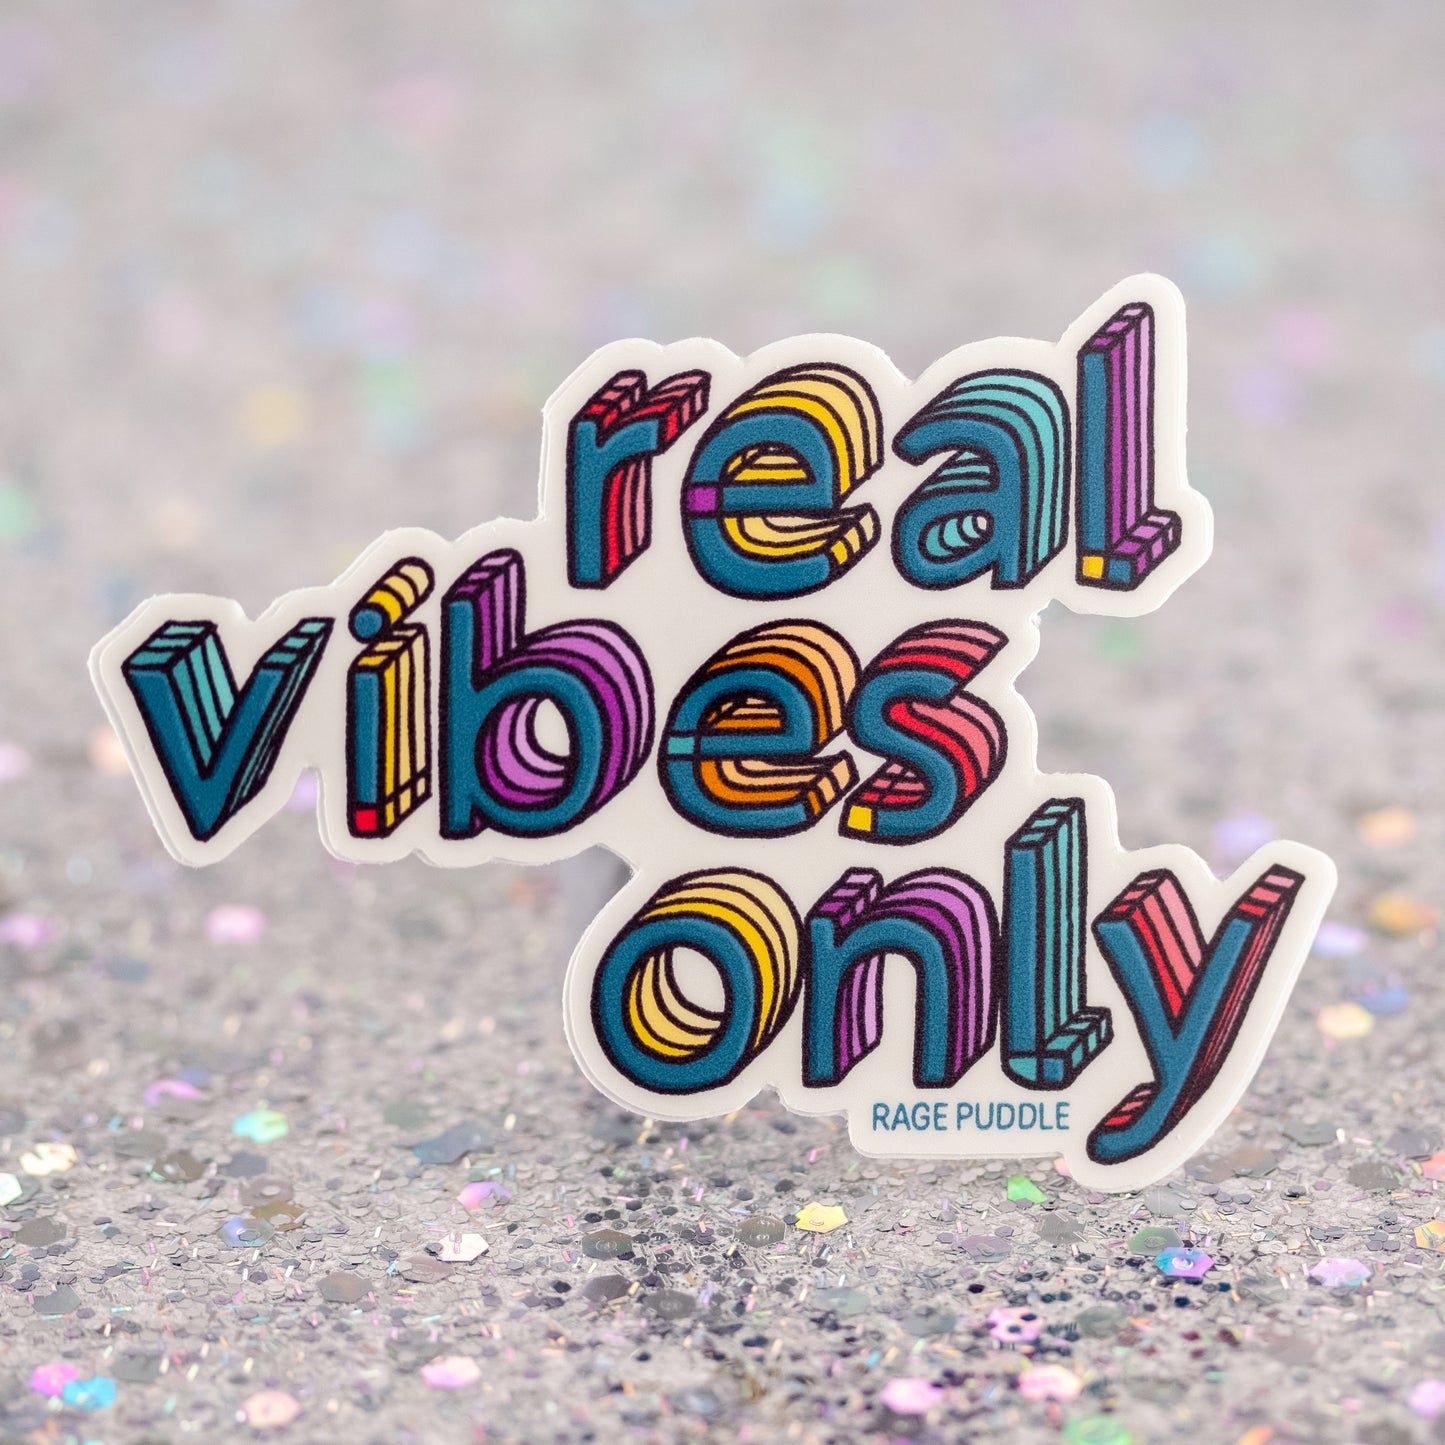 Real Vibes Only Sticker